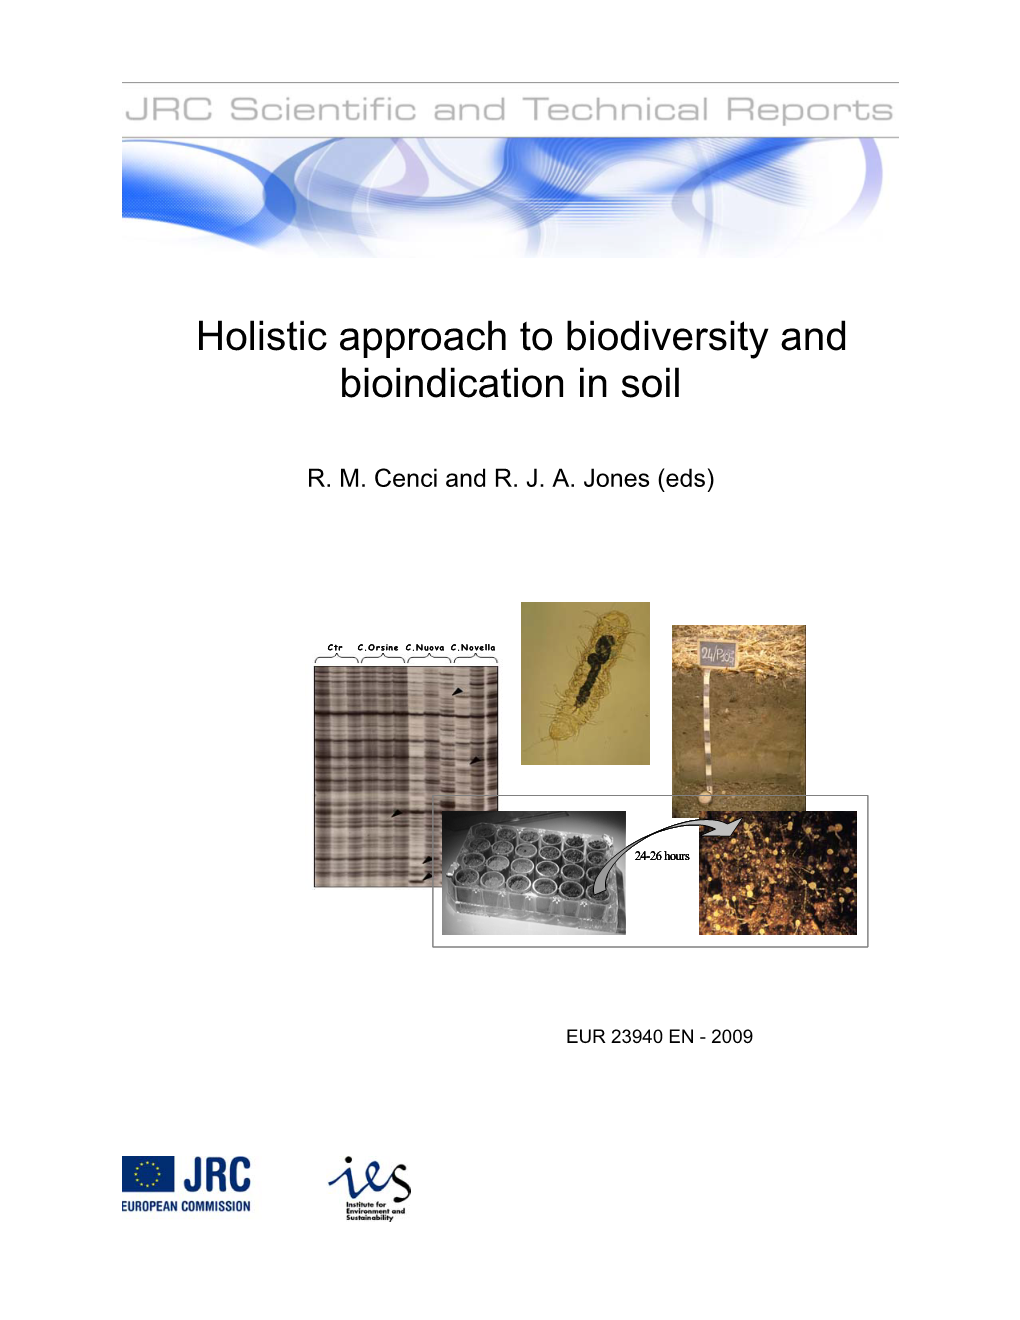 Holistic Approach to Biodiversity and Bioindication in Soil